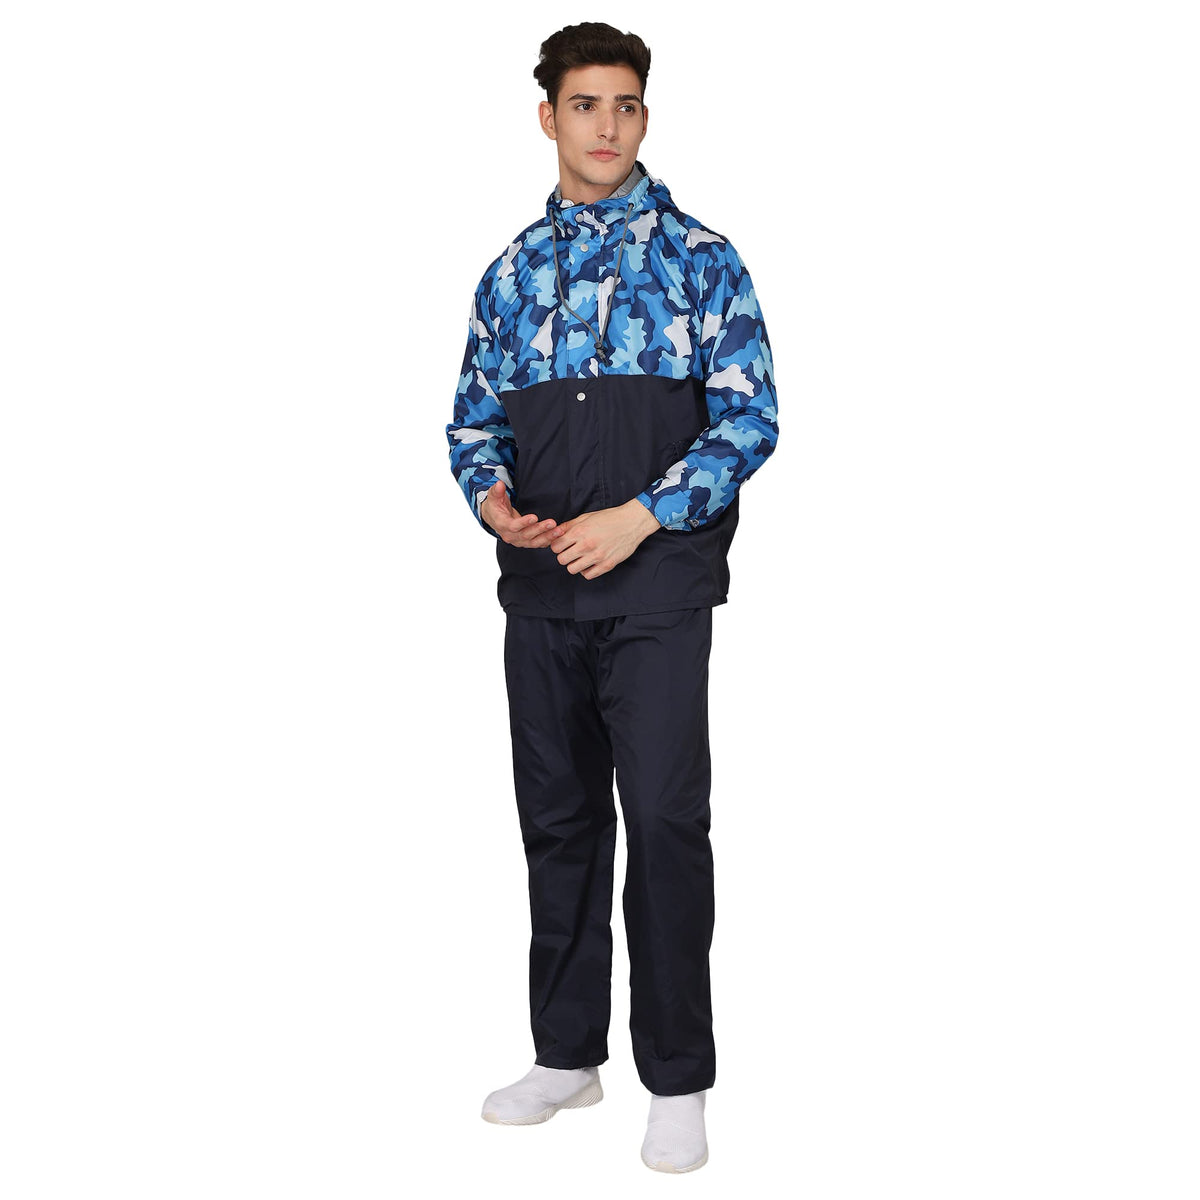 THE CLOWNFISH Napoleon Series Men's Waterproof Nylon Double Coating Reversible Raincoat with Hood and Reflector Logo at Back. Set of Top and Bottom. Printed Plastic Pouch with Rope (Blue, X-Large)